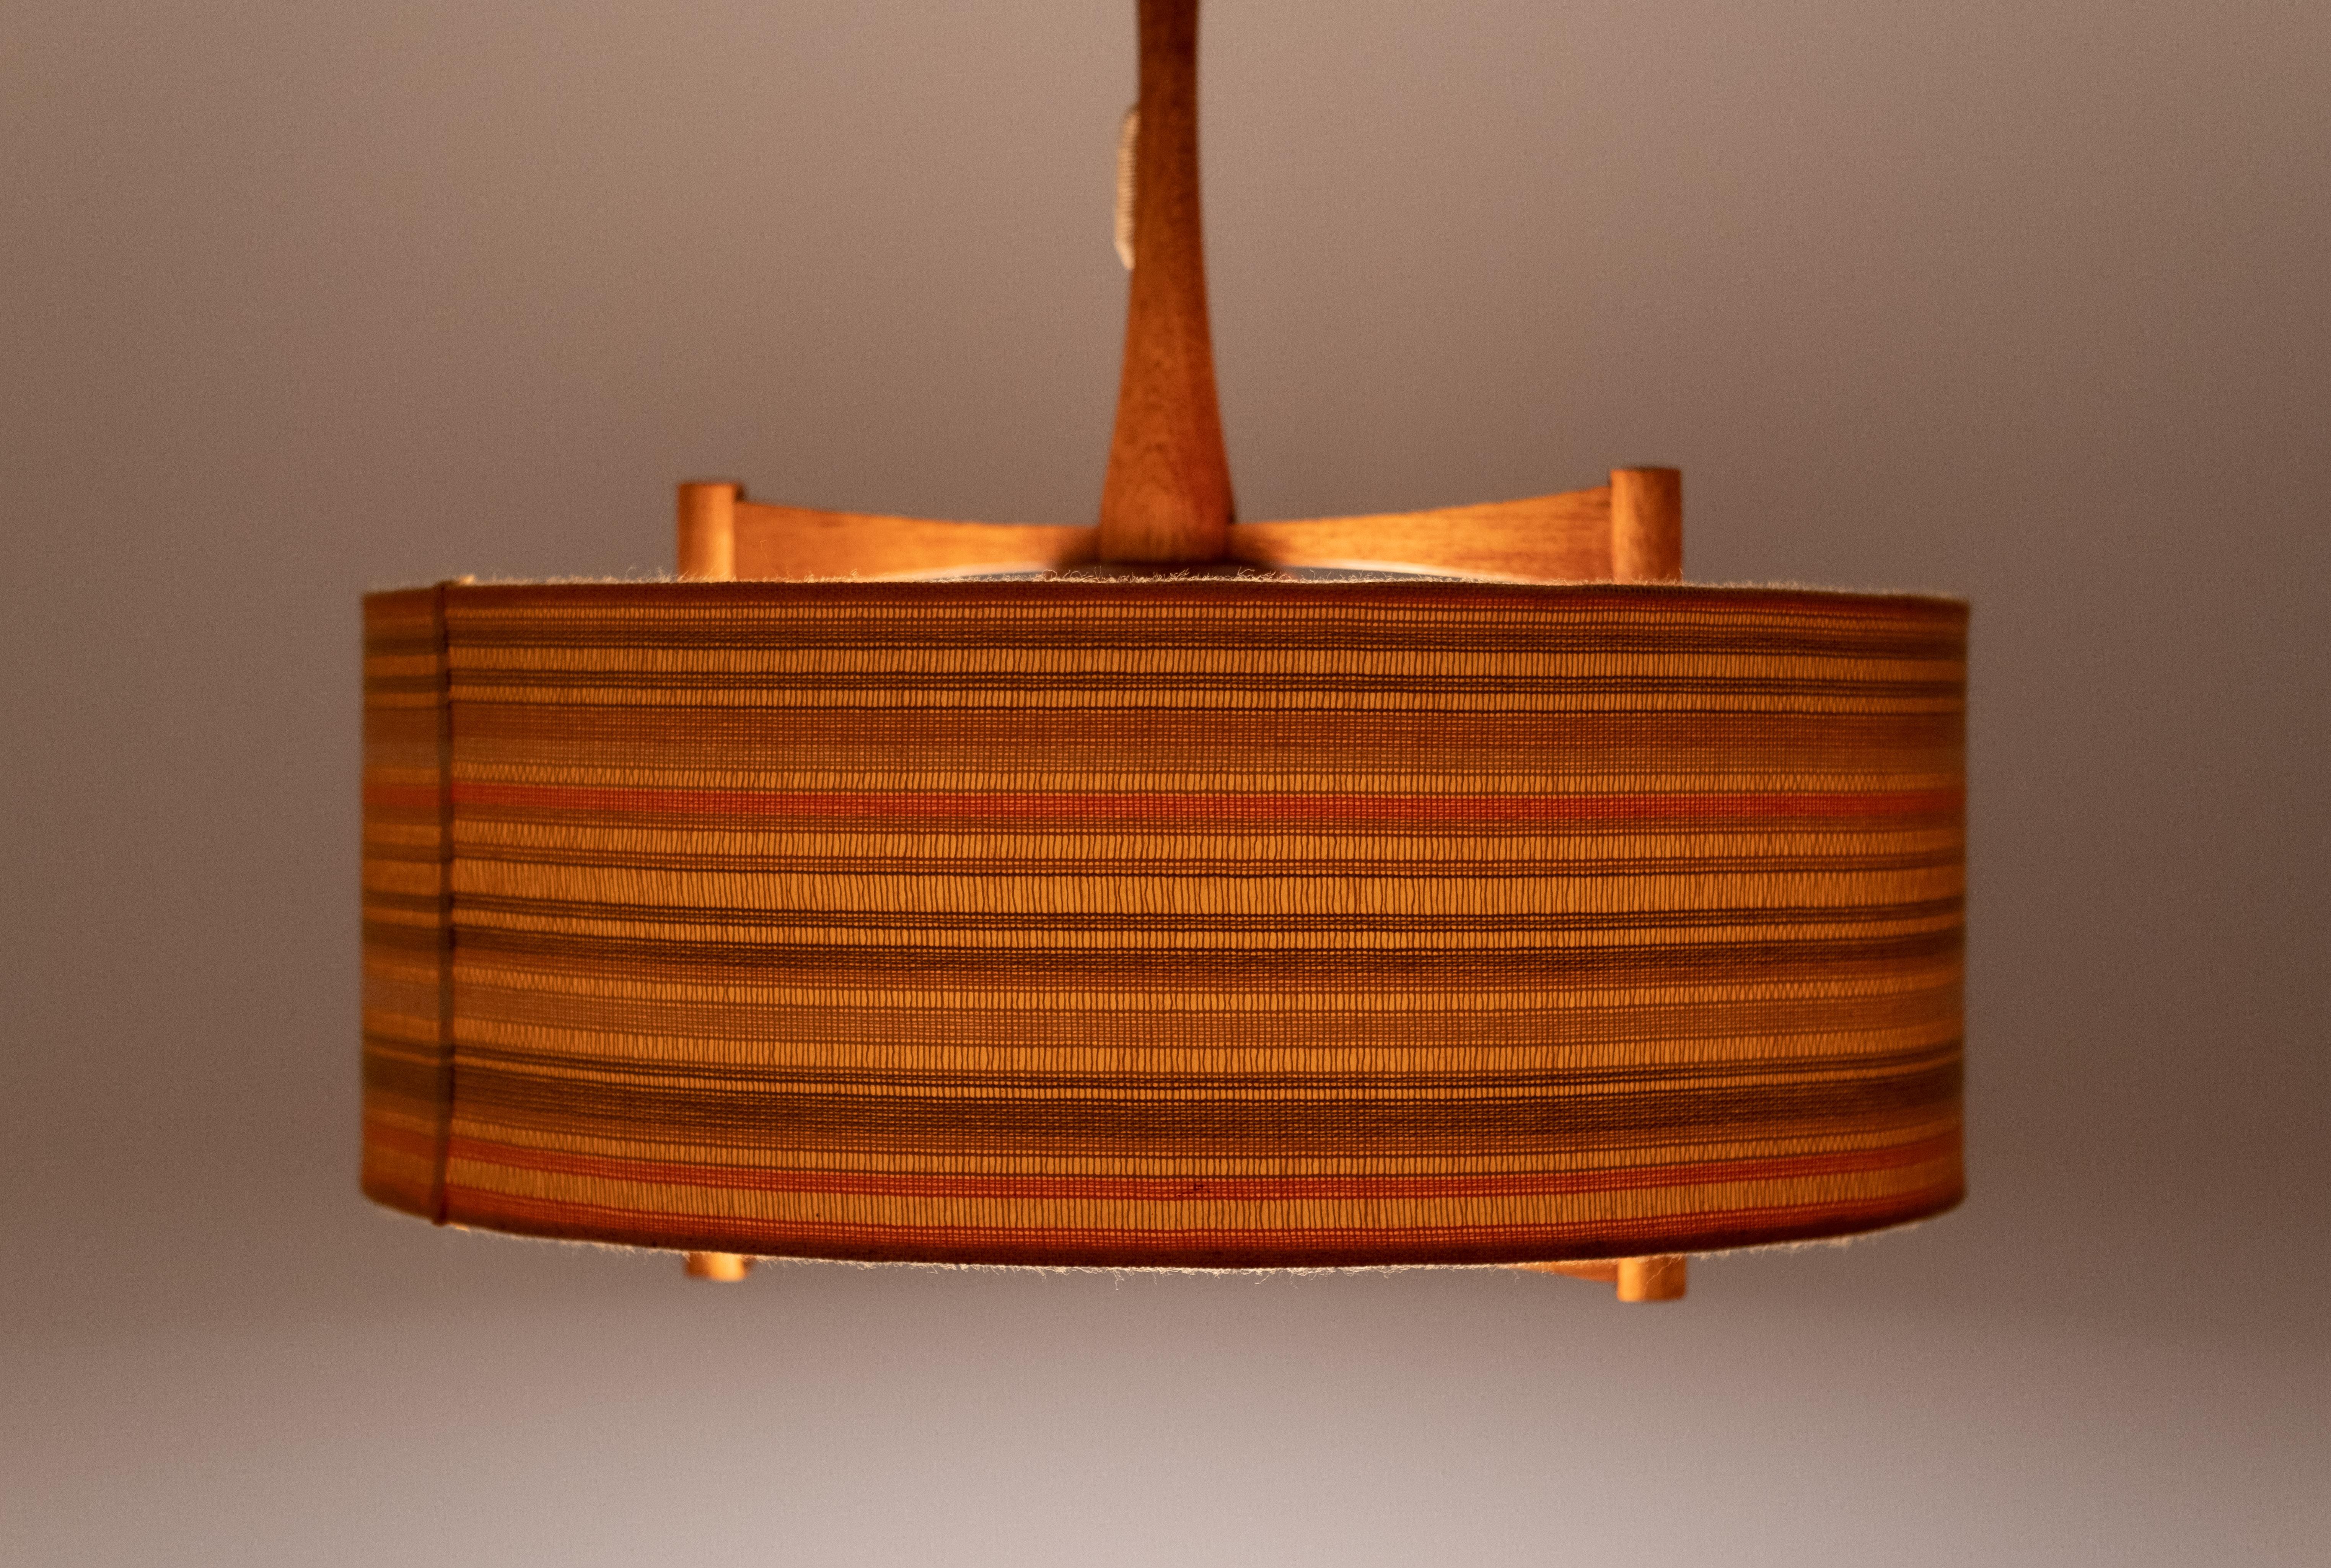 Fantastic pendant lamp by Temde Germany 1960s. Teak frame. milk glass inner shade,
comes with the original fabric shade. In orange and brown typical for that era. In a very good condition.
   